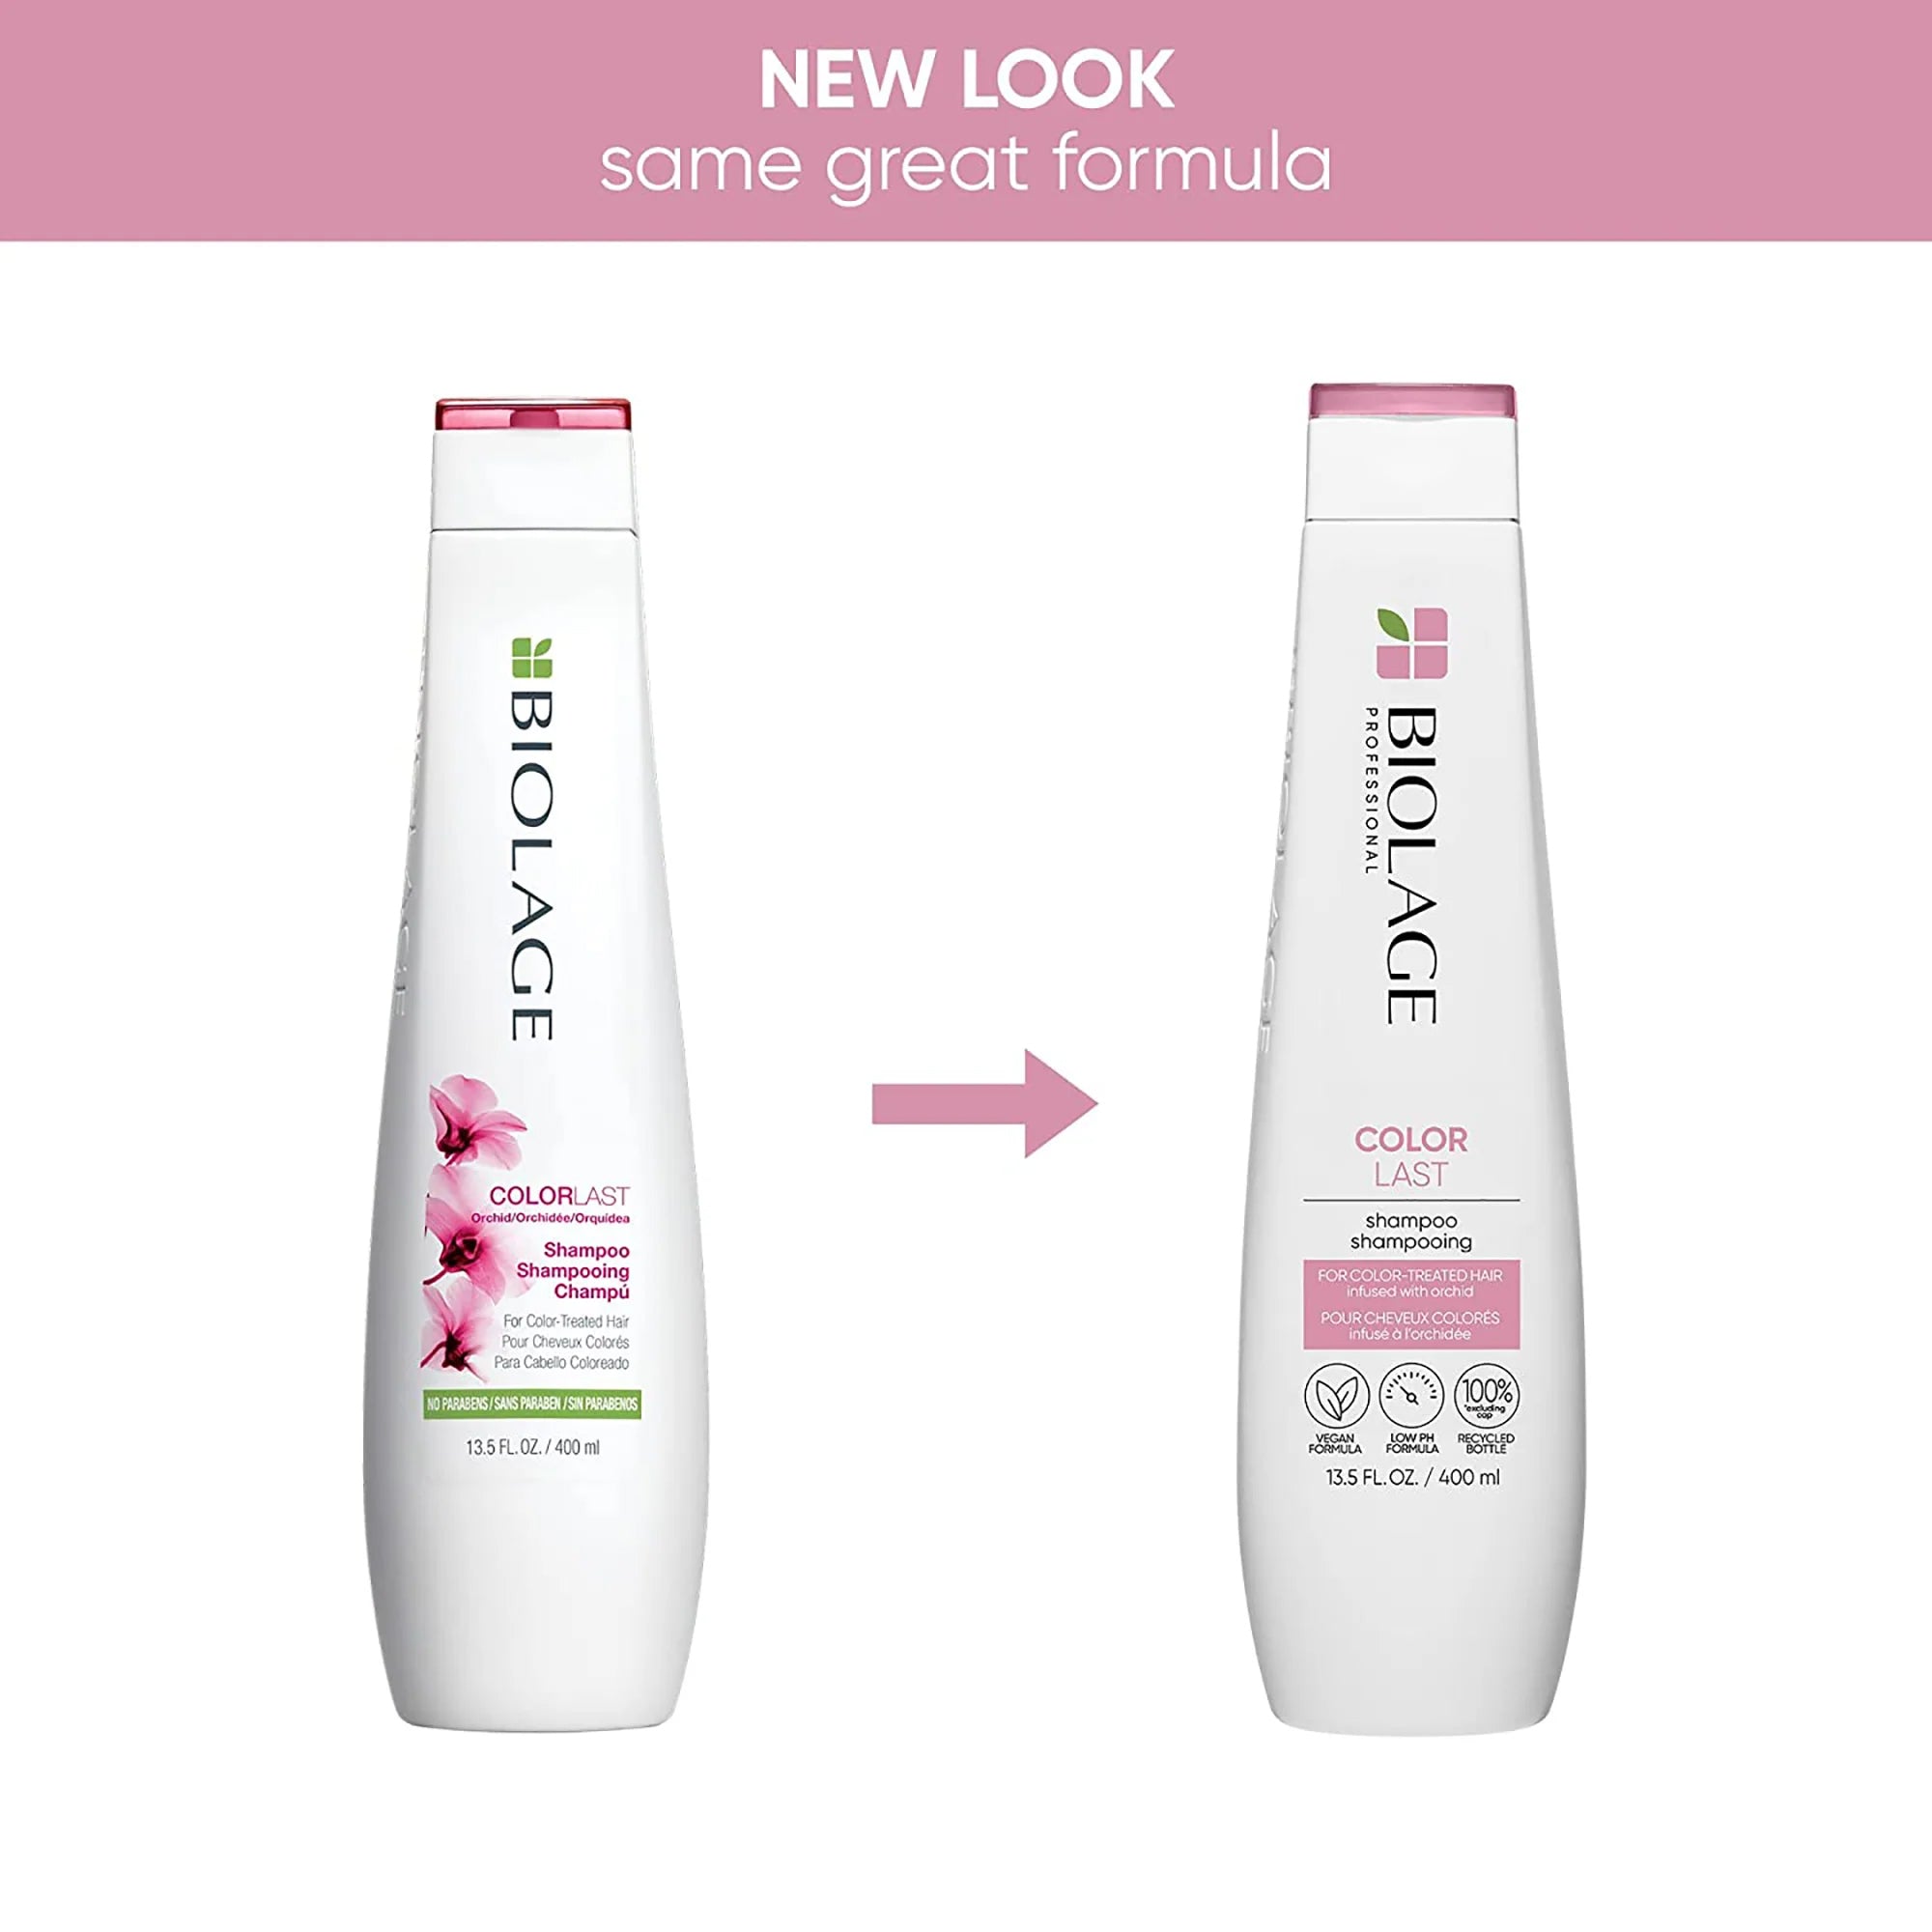 Biolage Colorlast Shampoo New packaging